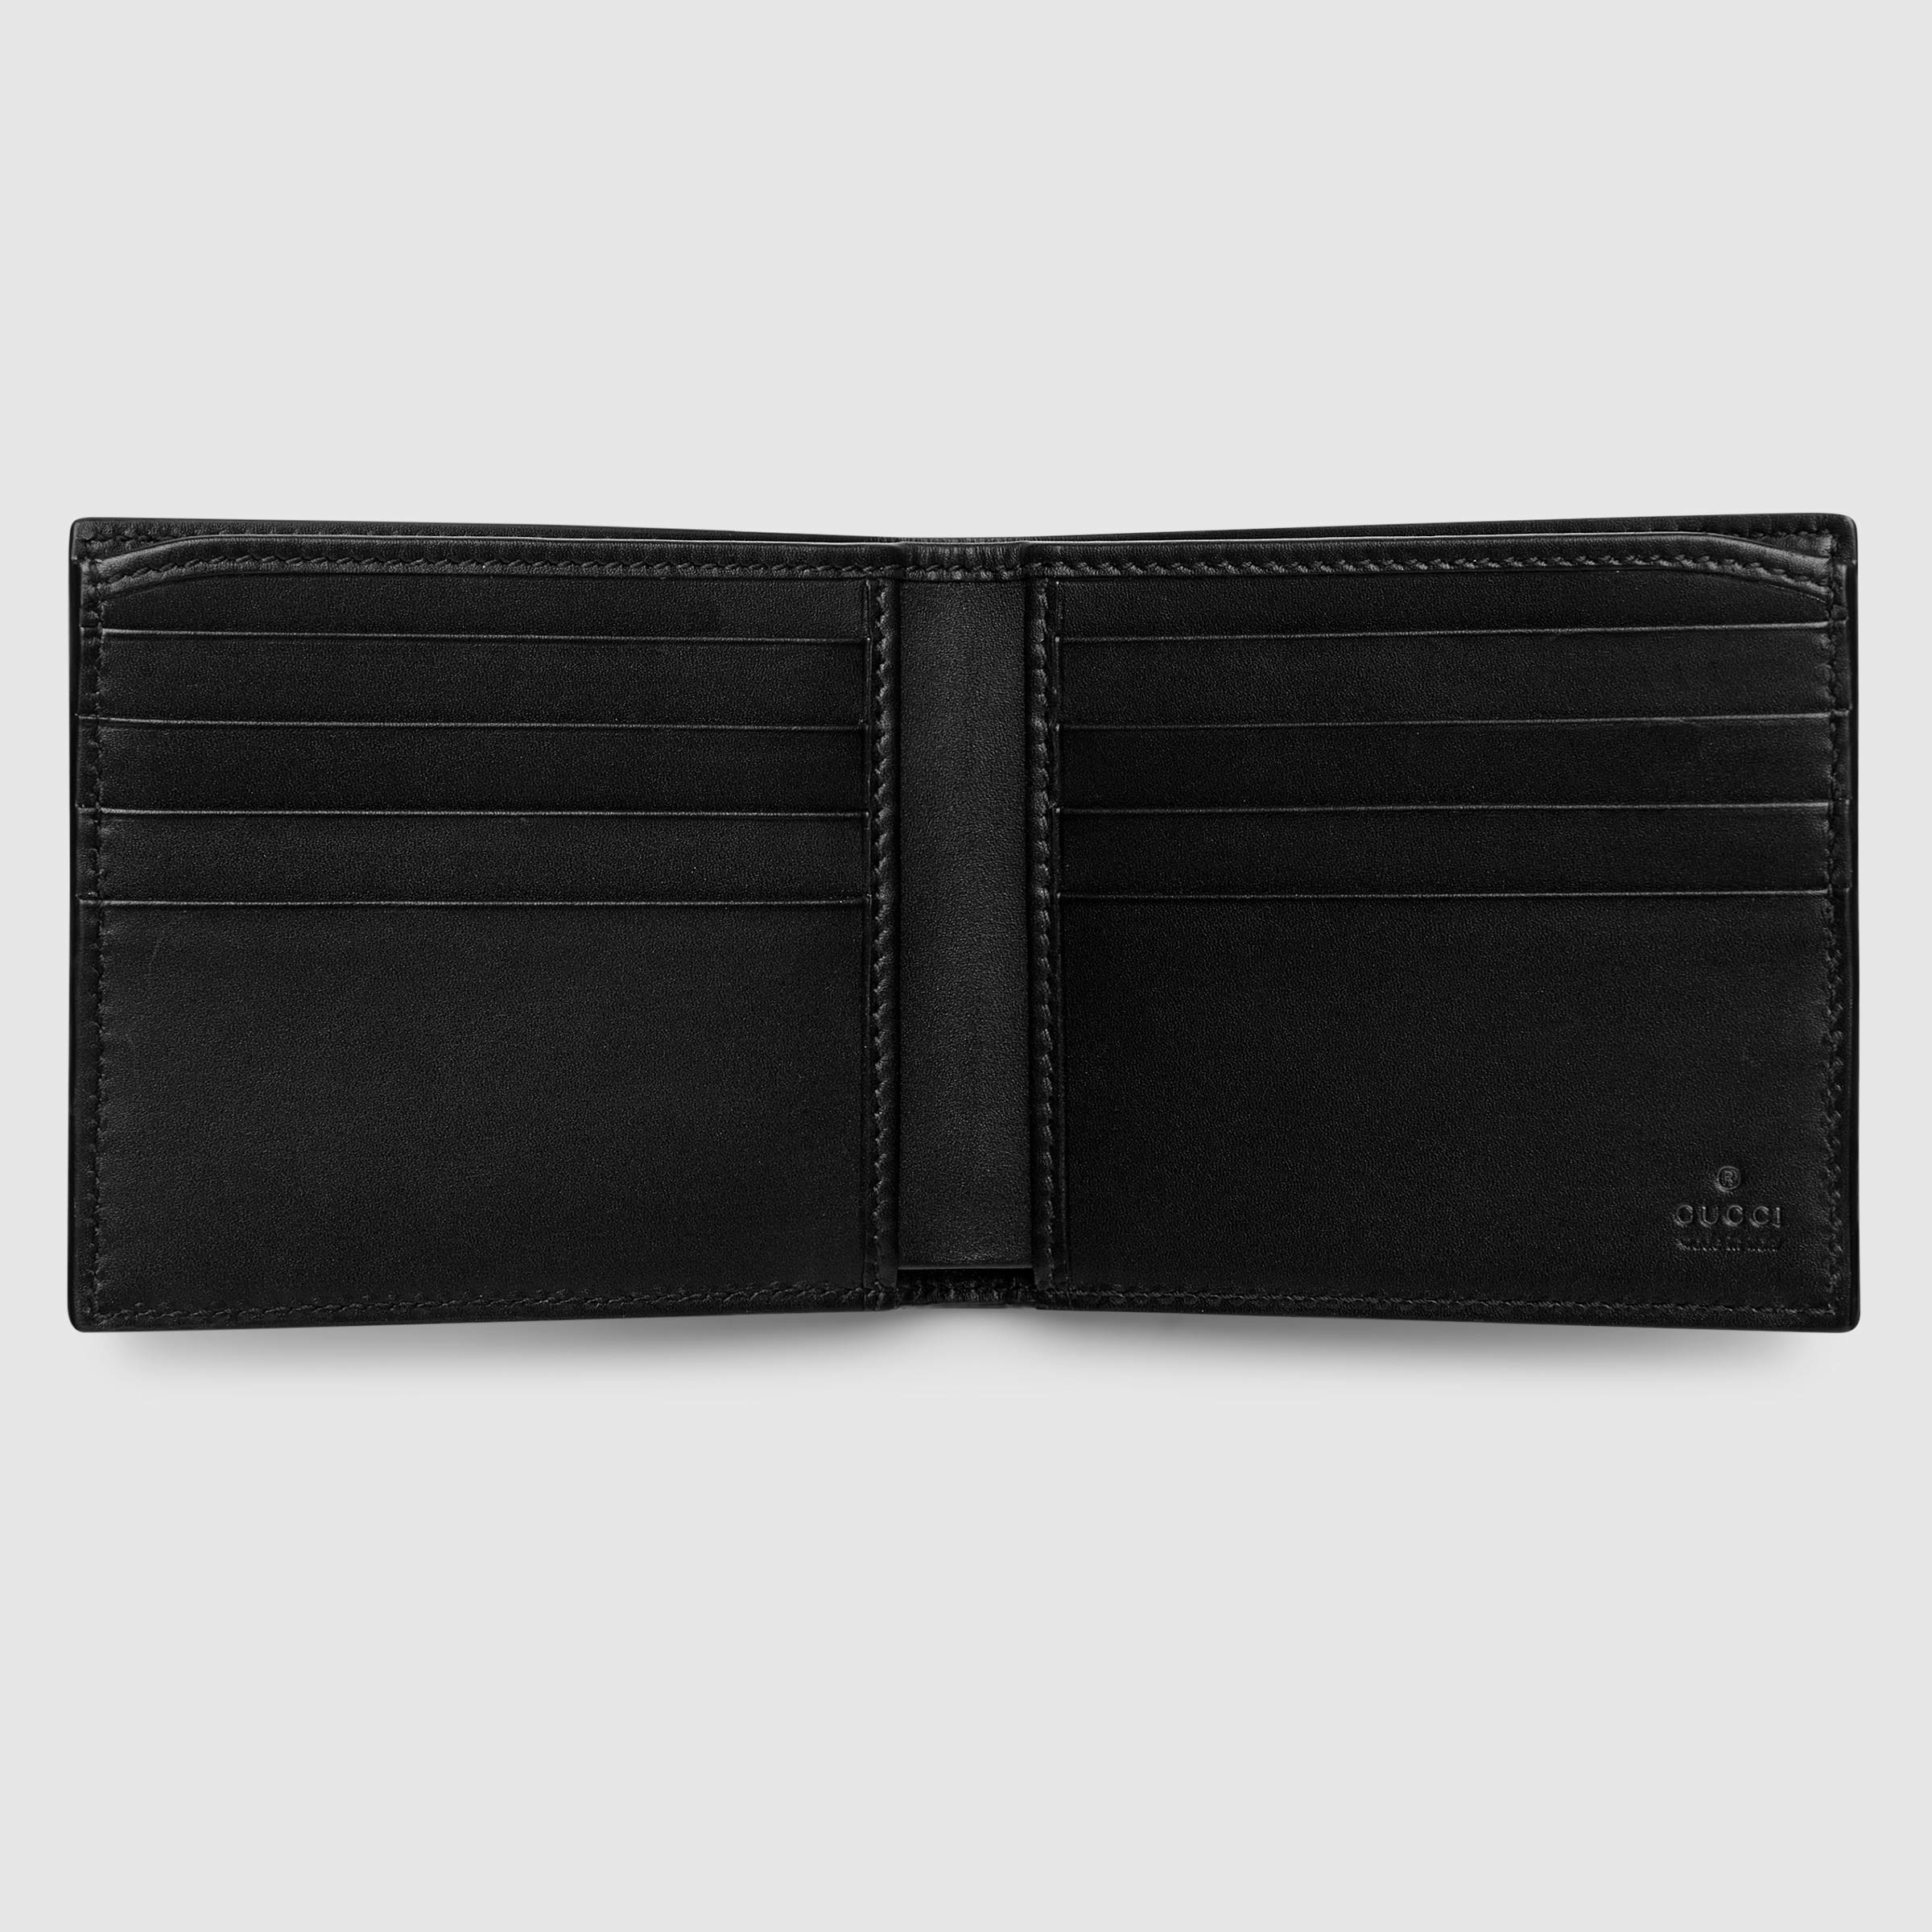 Lyst - Gucci Ghost Wallet in Black for Men